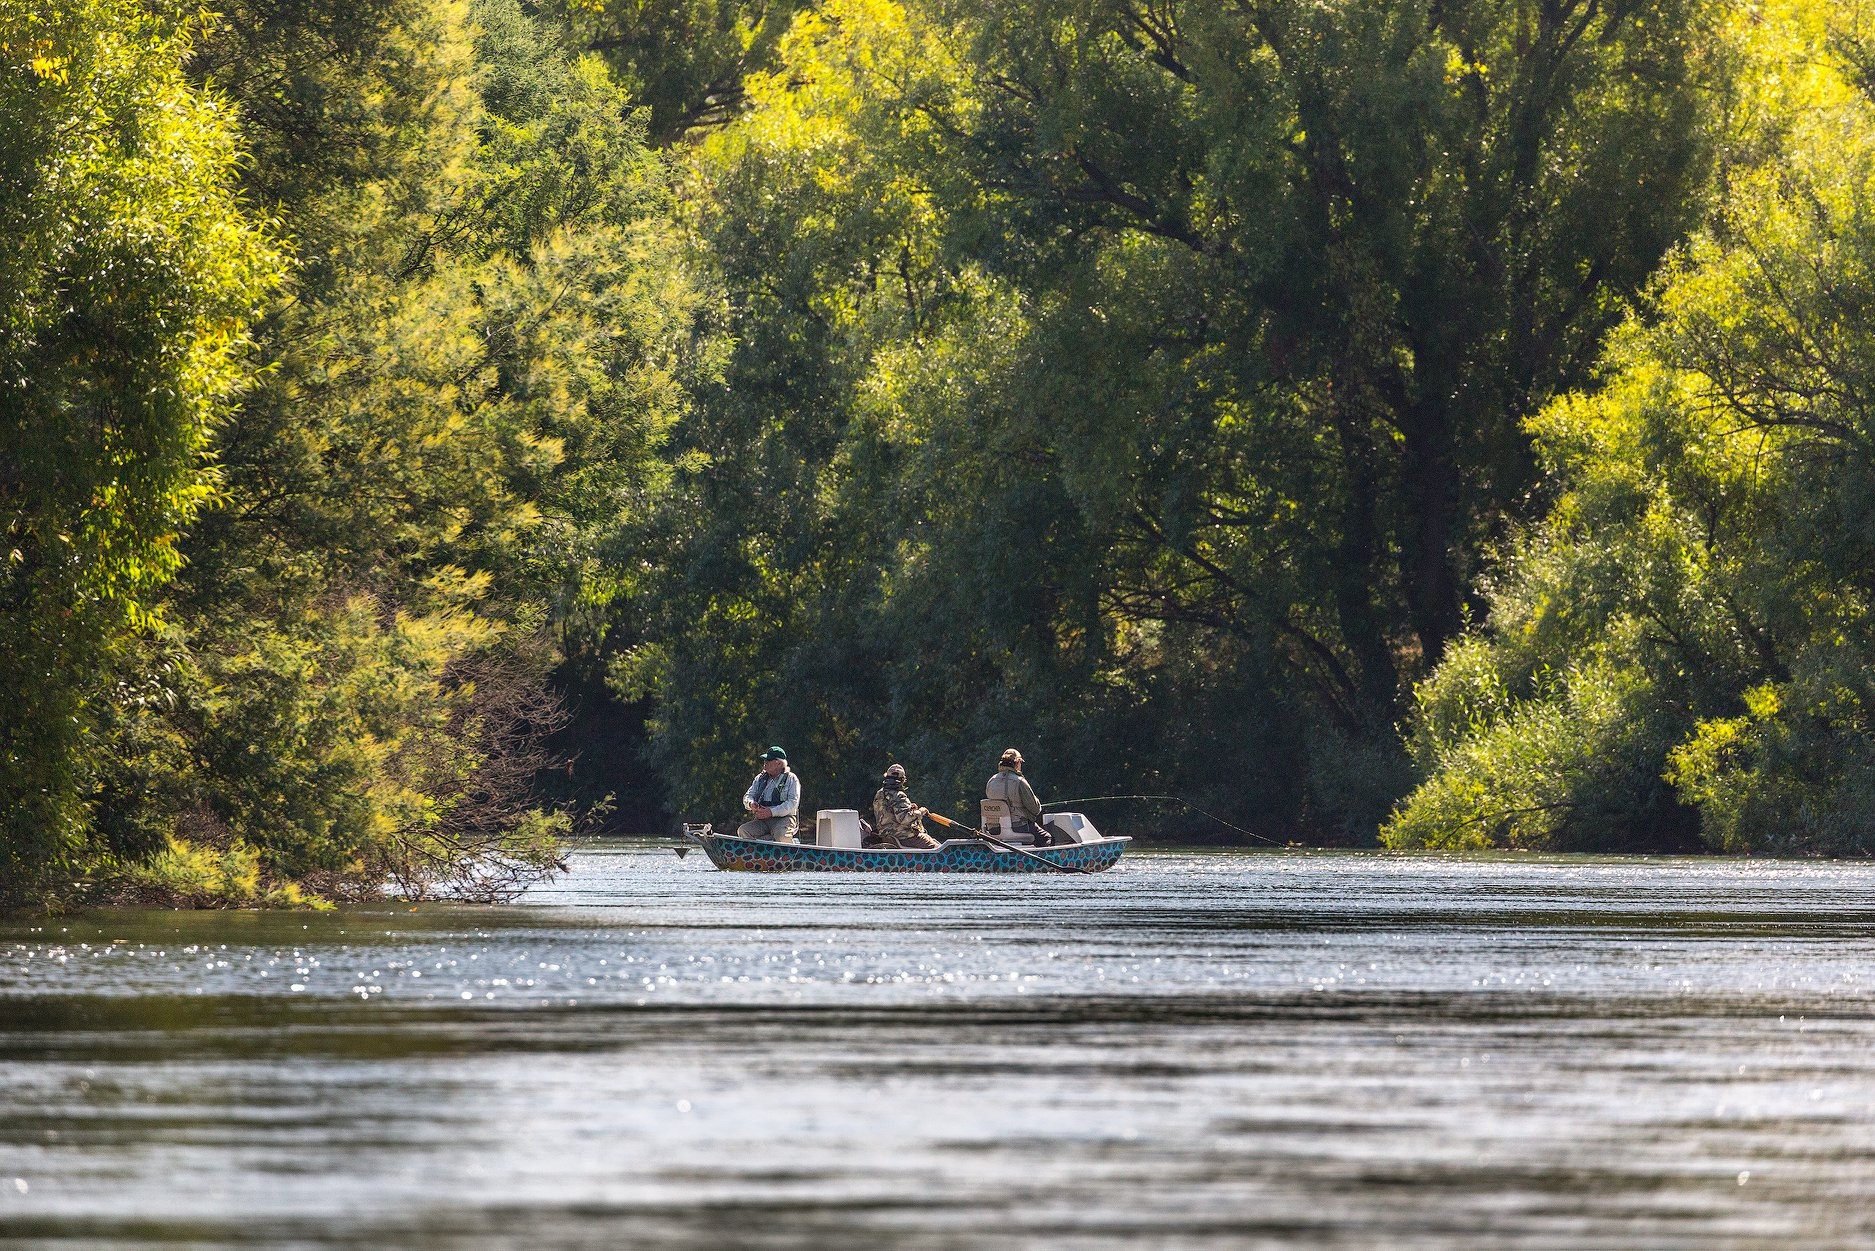 Be blown away by stunning river scenery on our Goulburn River Adventure